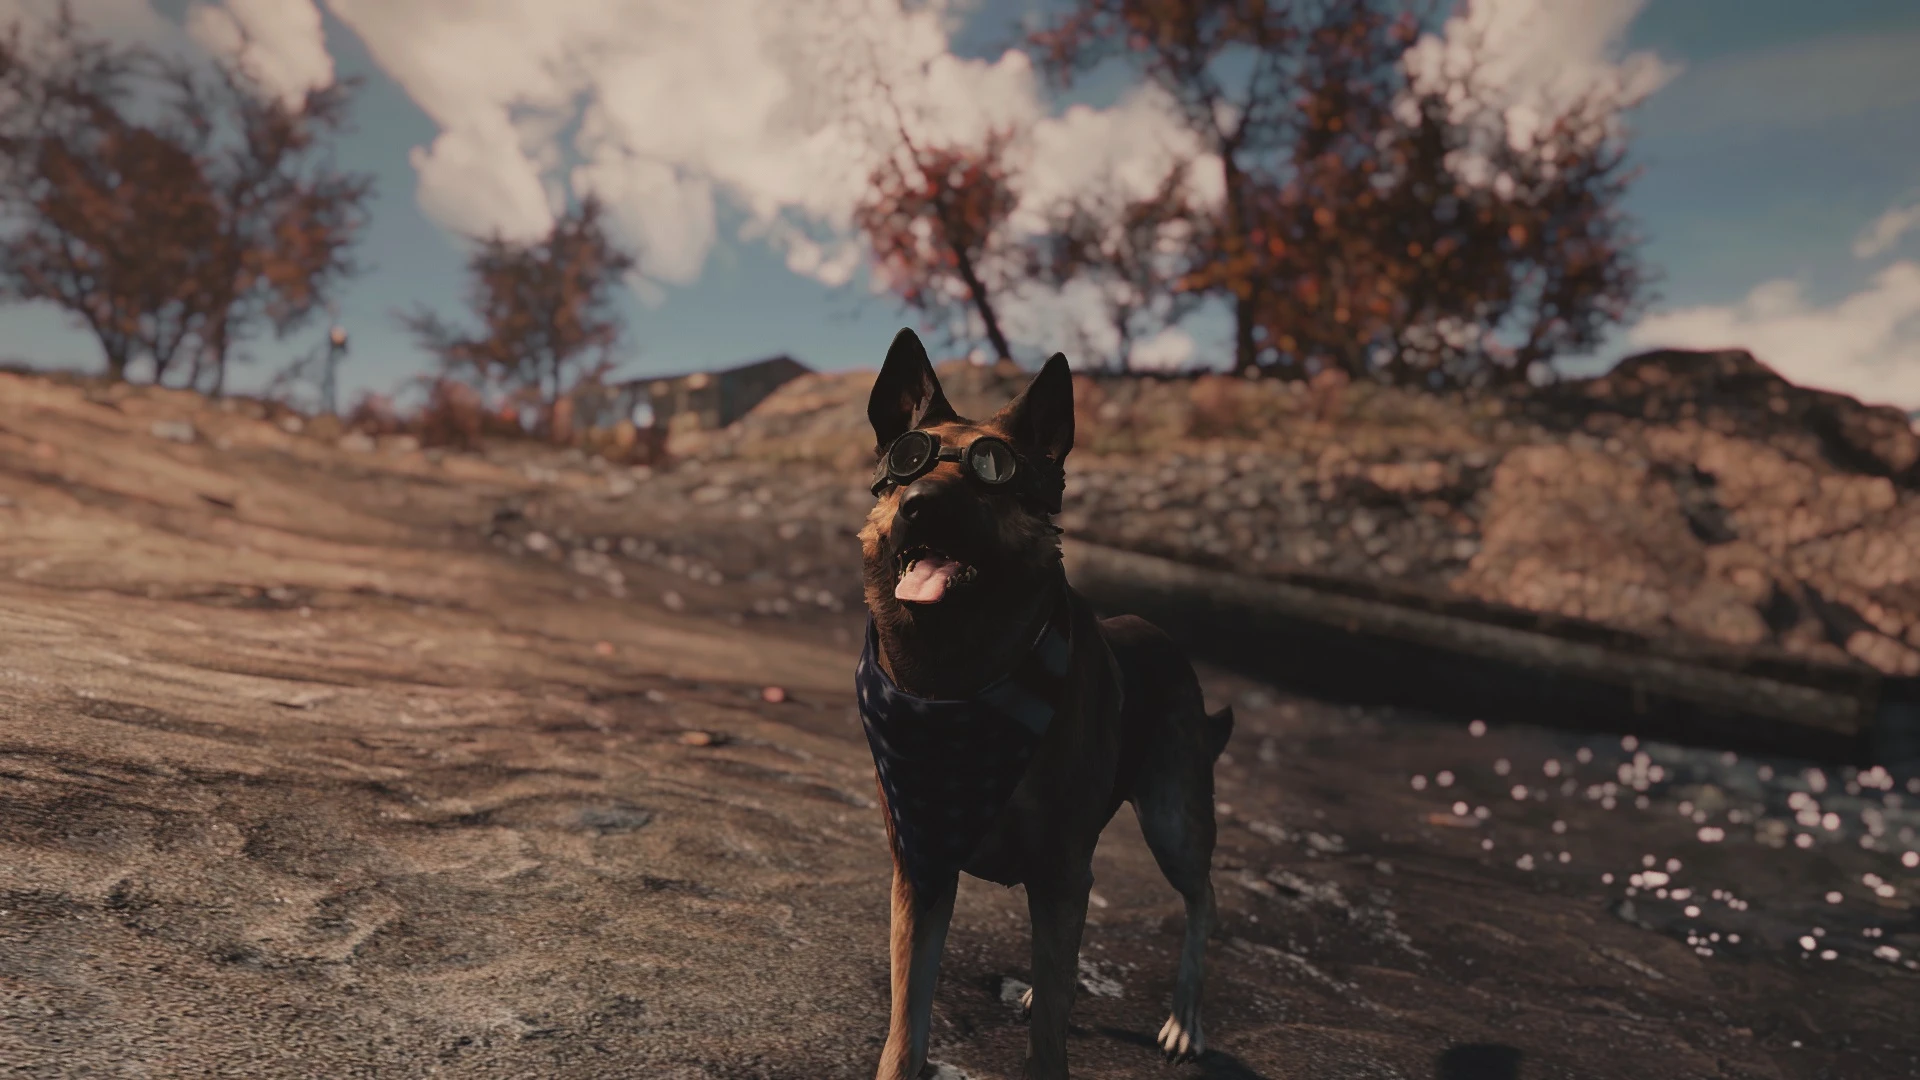 Fallout 4 Dog Porn - Just Earth Porn and Oddities at Fallout 4 Nexus - Mods and ...